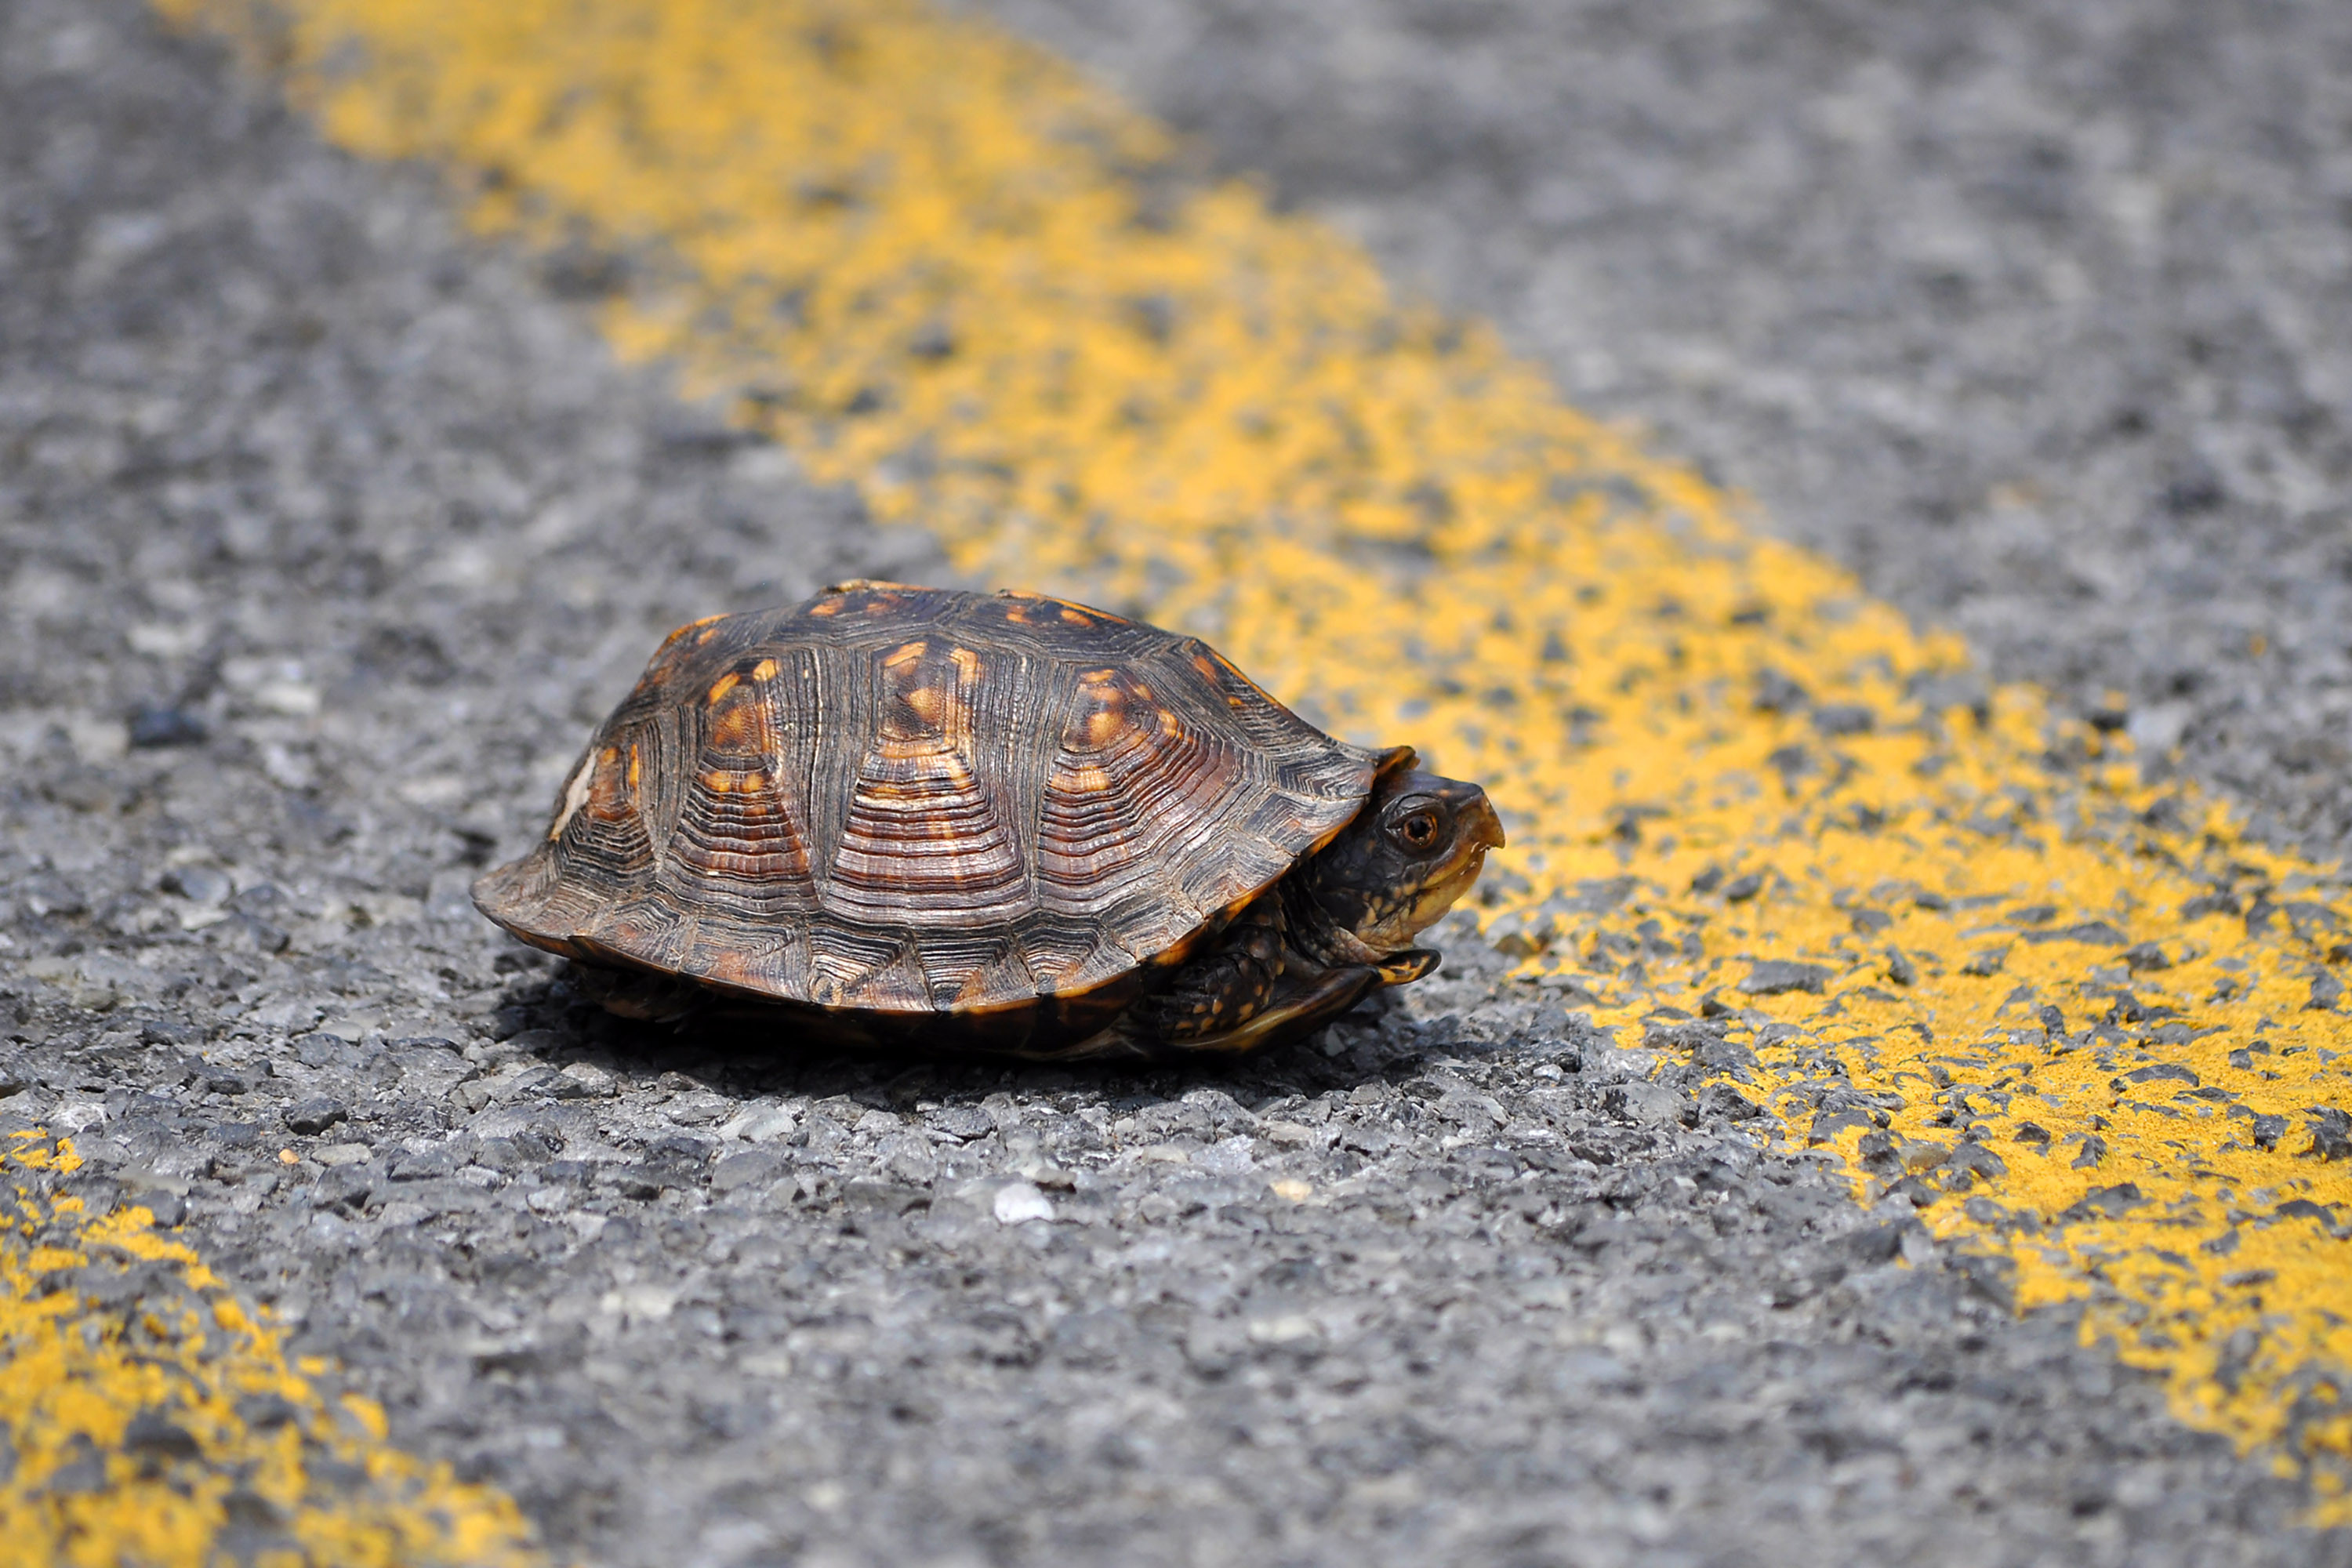 State actually wants you to help turtles cross the road